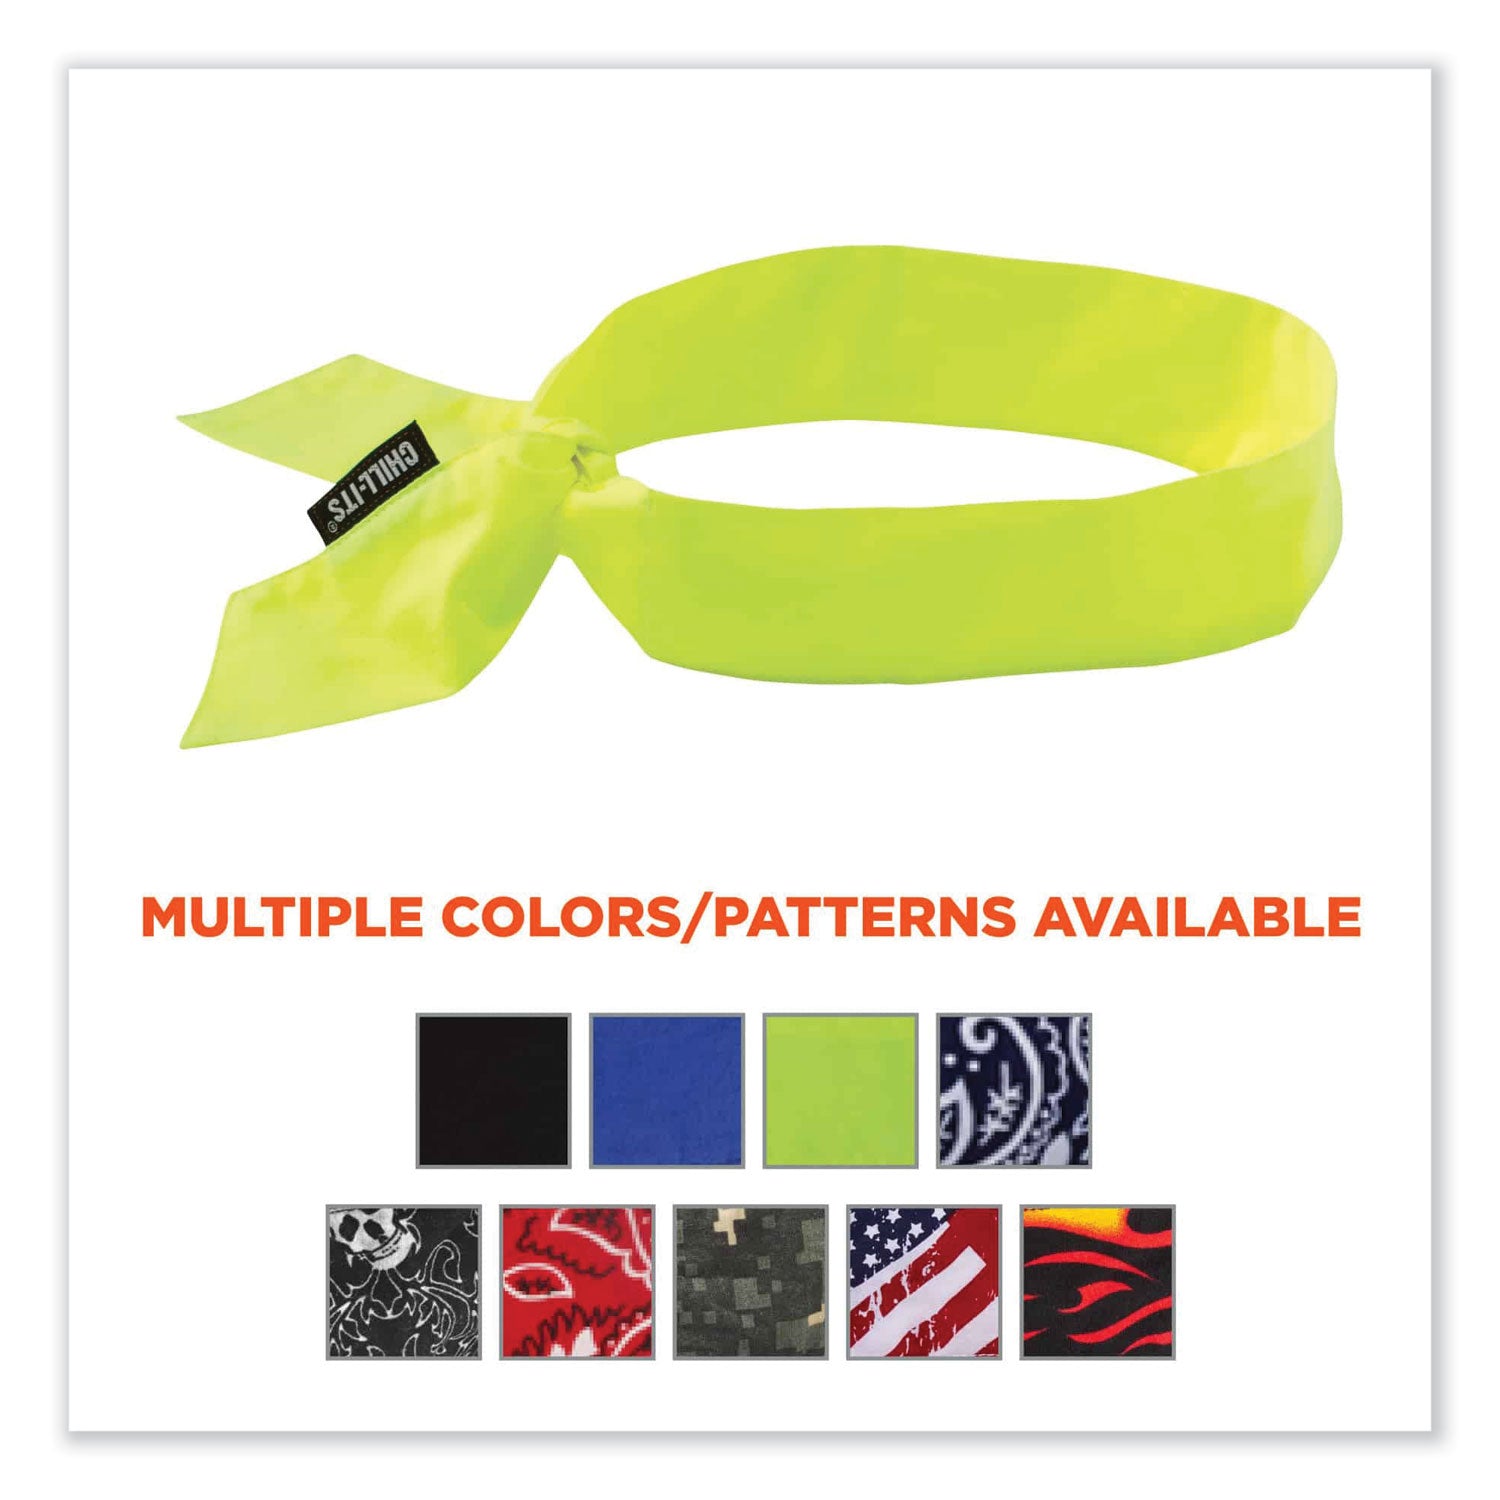 chill-its-6700-cooling-bandana-polymer-tie-headband-one-size-fits-most-lime-ships-in-1-3-business-days_ego12301 - 5